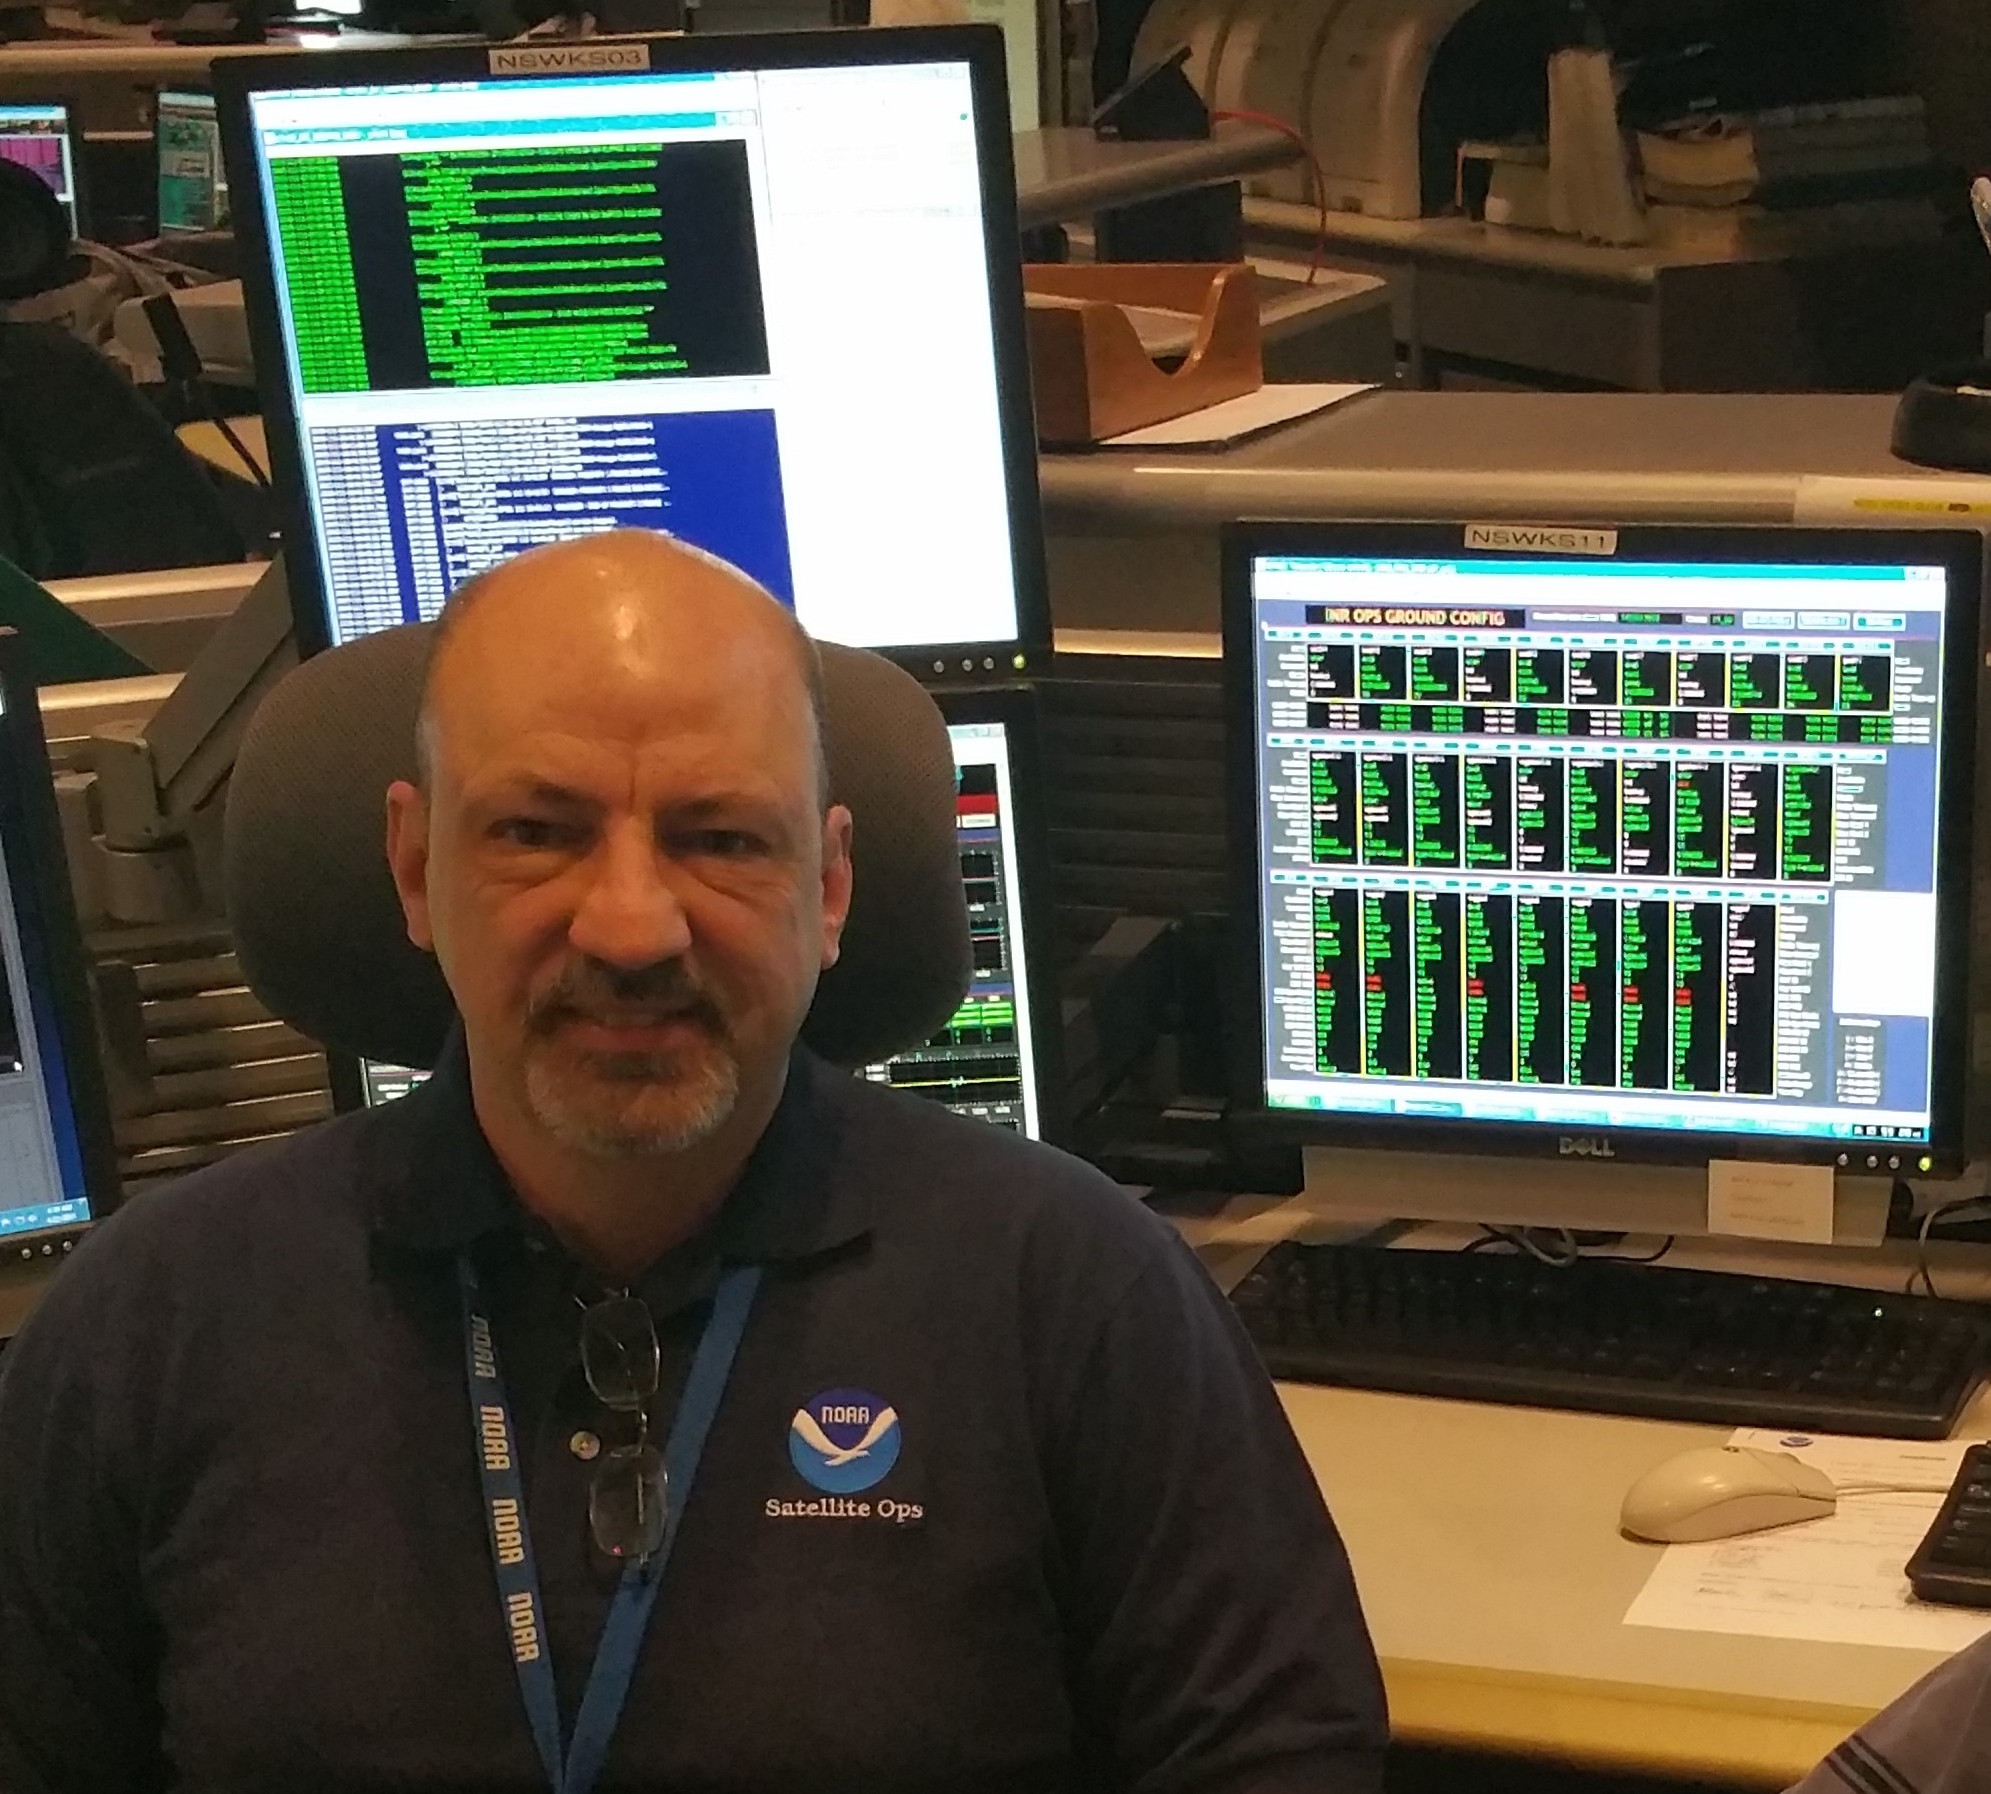 Photograph of Tom Boyd at NOAA's Satellite Operation Control Center.